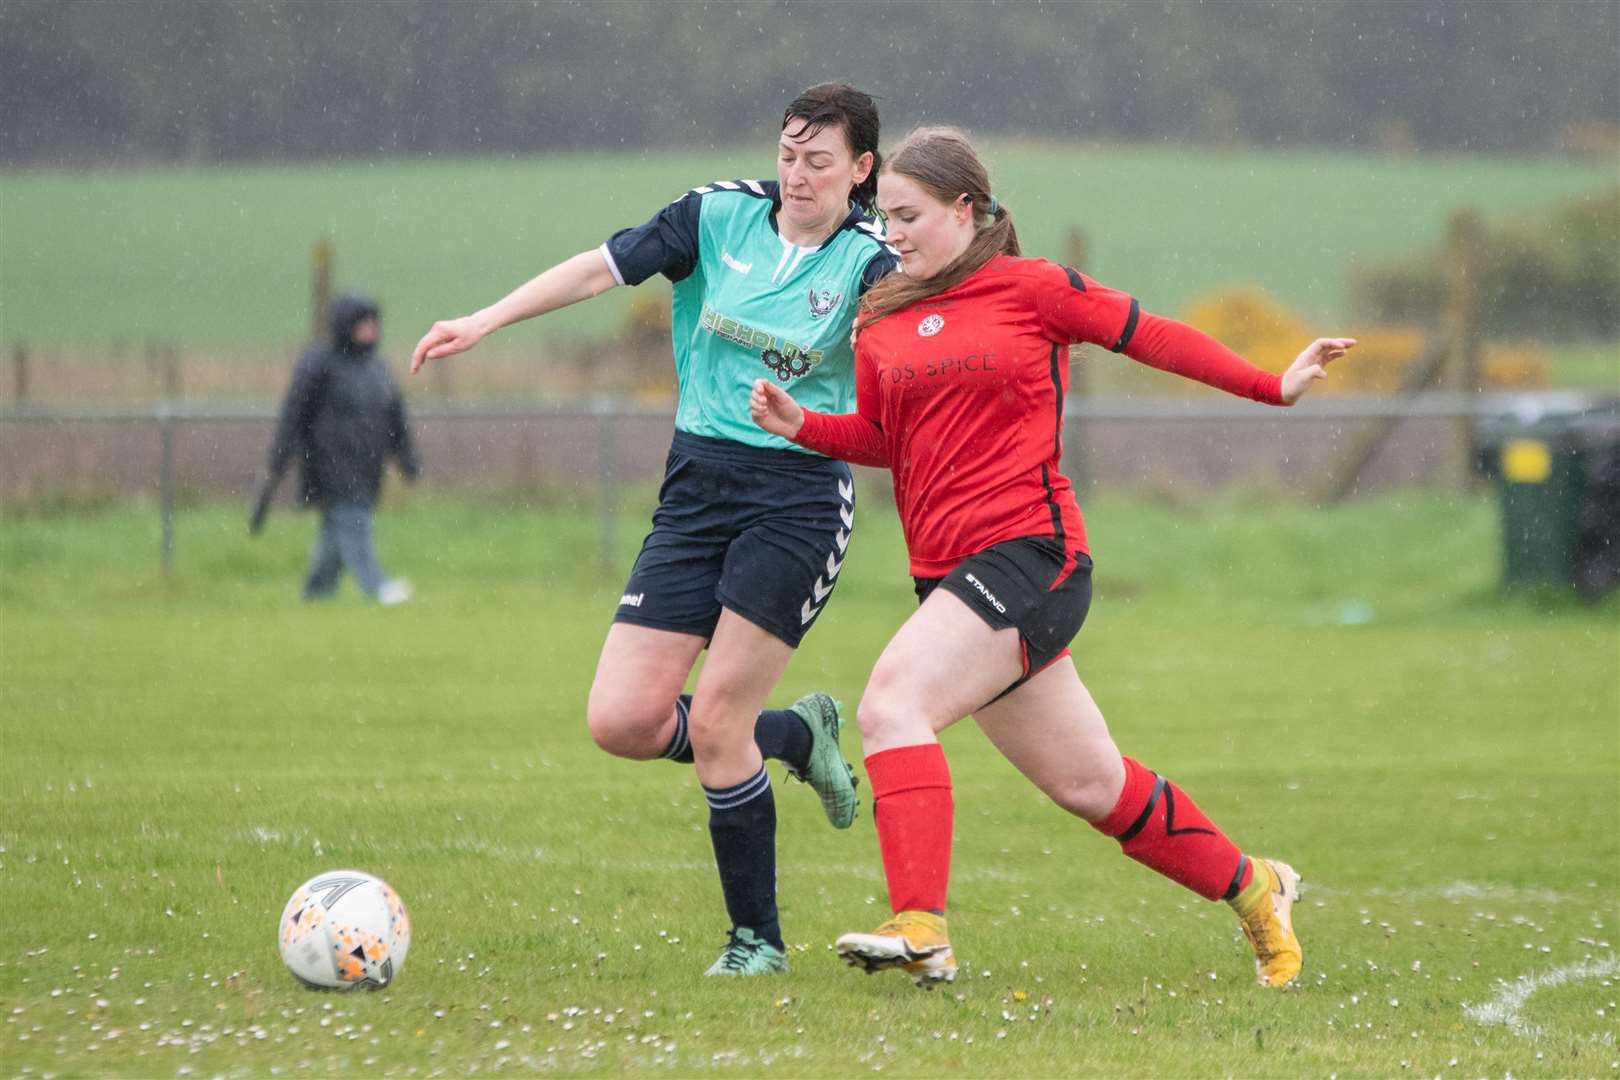 Karen Brockie levelled the score for Buckie after Clach's shock opener. Picture: Daniel Forsyth